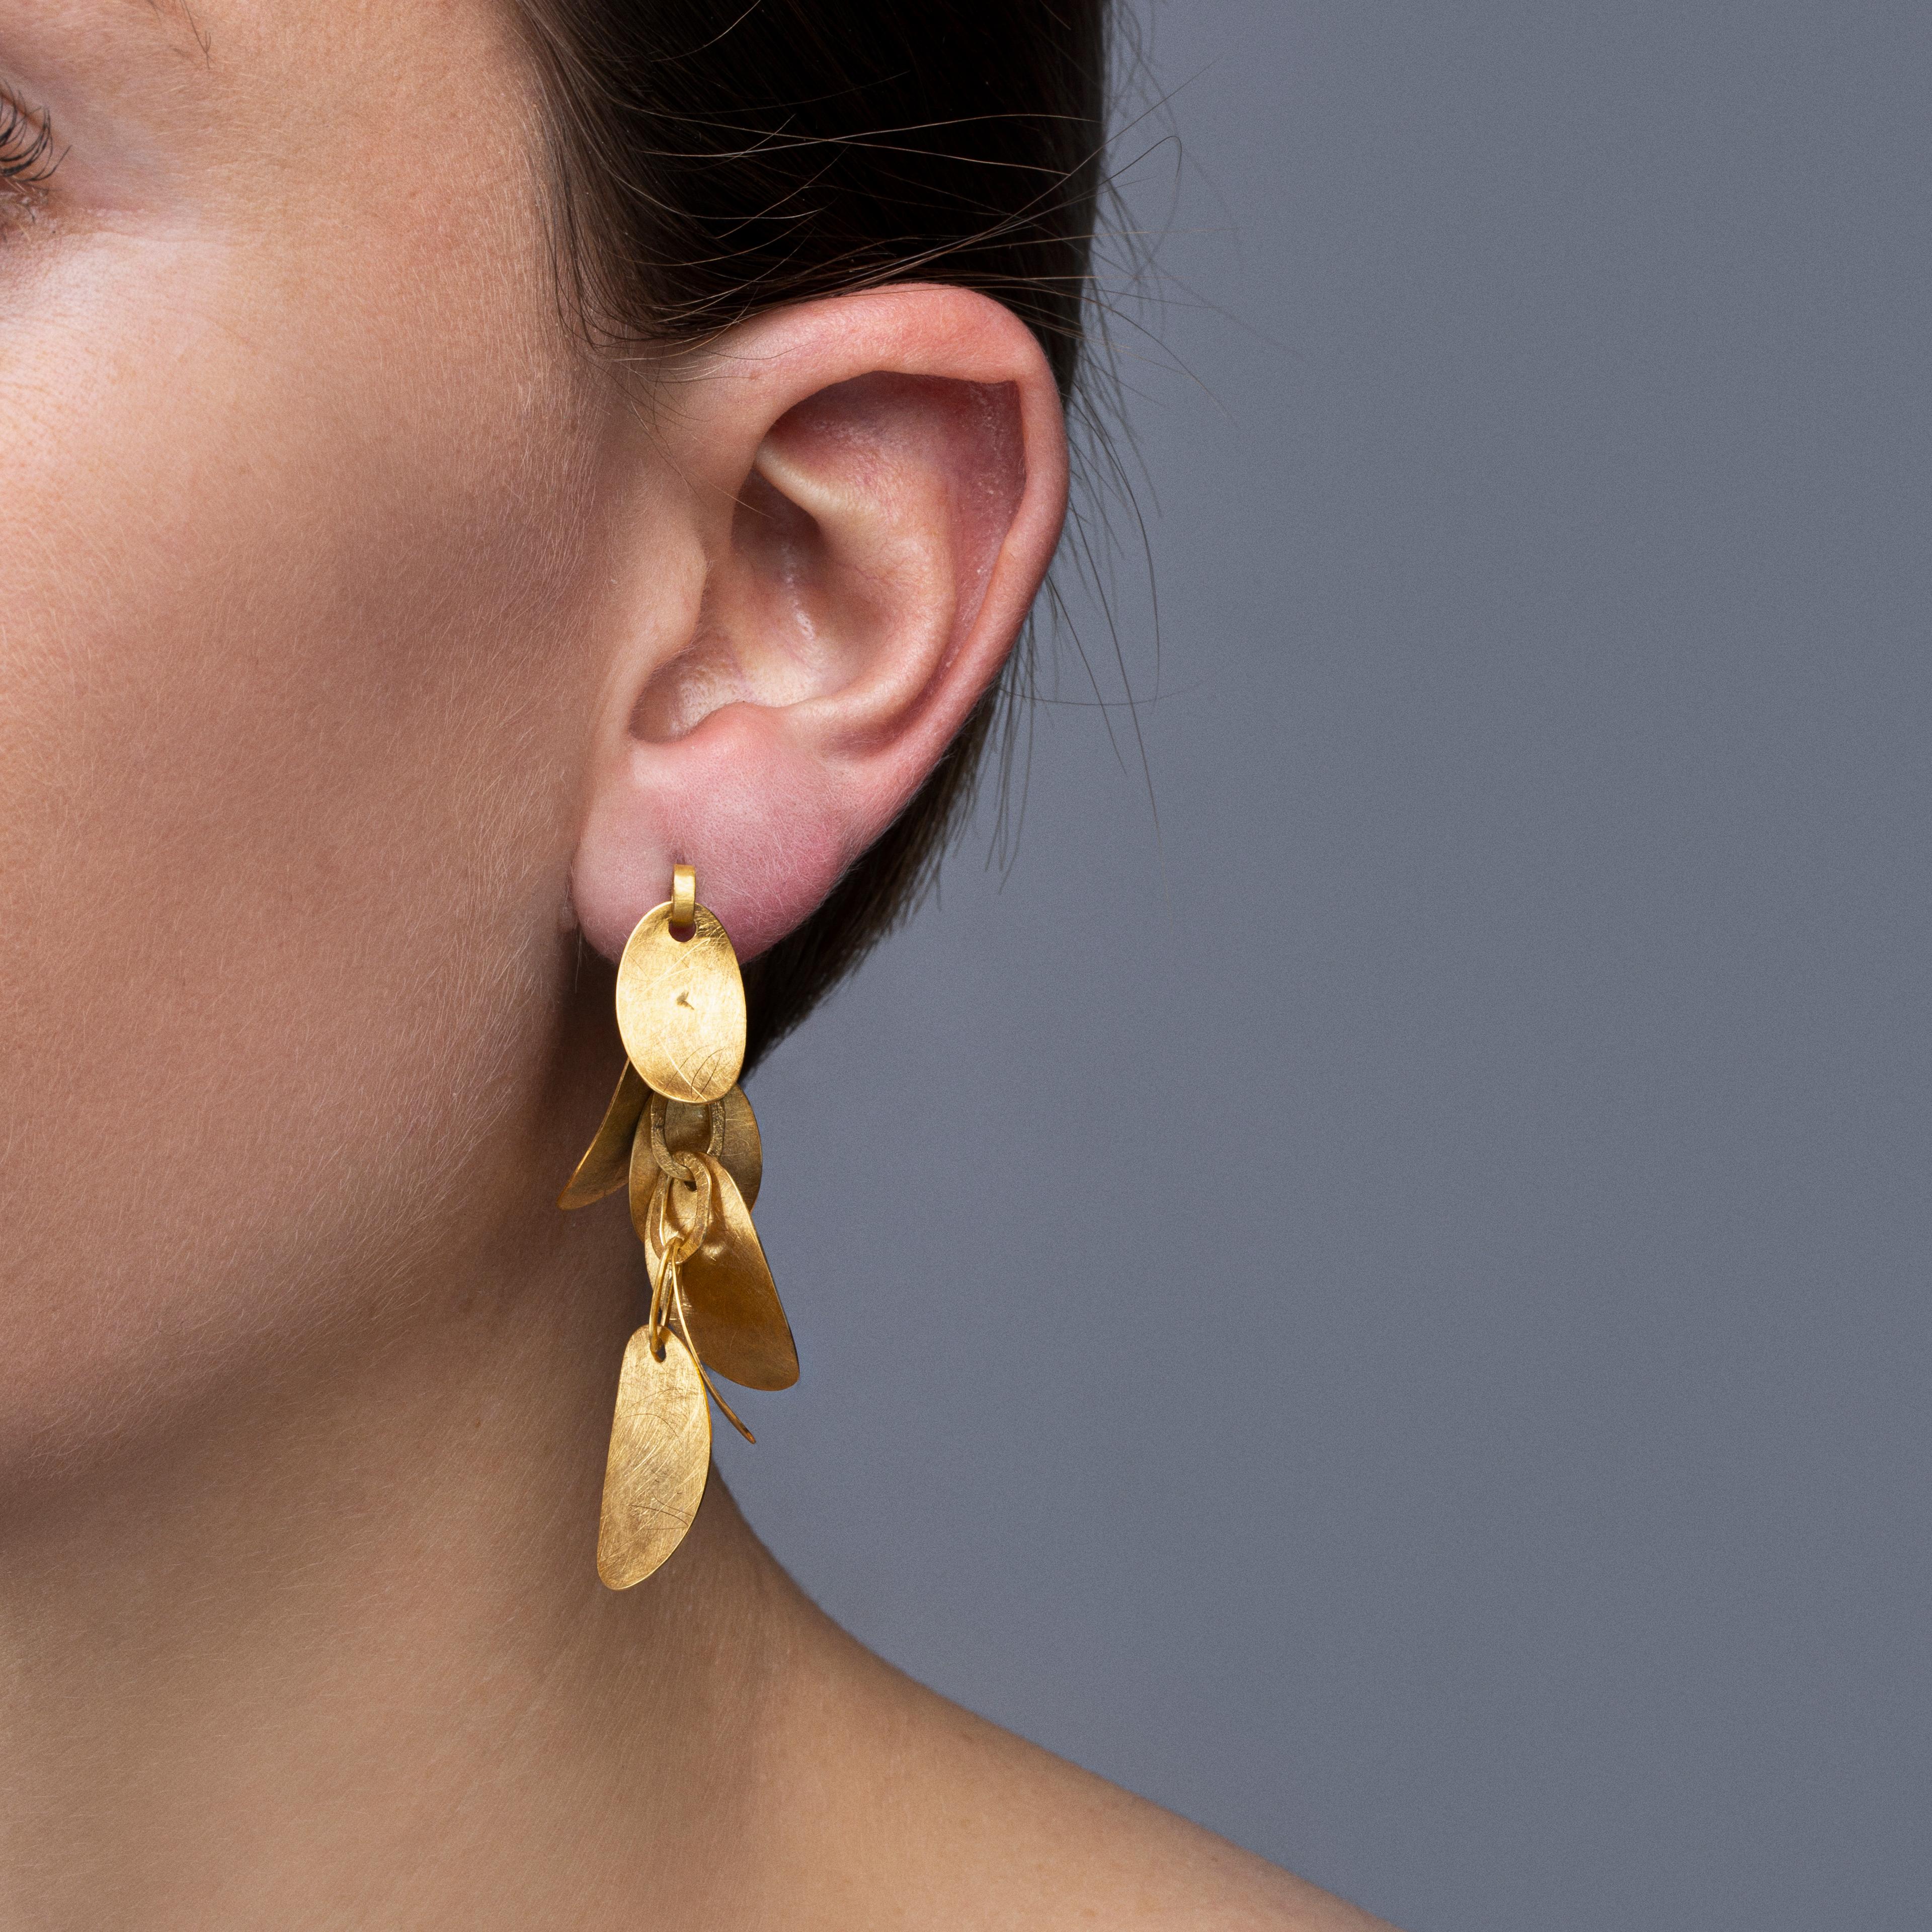 Alex Jona design collection, hand crafted in Italy, 18 karat rough frosted yellow gold multiple leaves pendant earrings.
Dimensions: H 1.9in/48mm, W 0.39in/9.9mm, D 0.23in/5.87mm.

Alex Jona jewels stand out, not only for their special design and